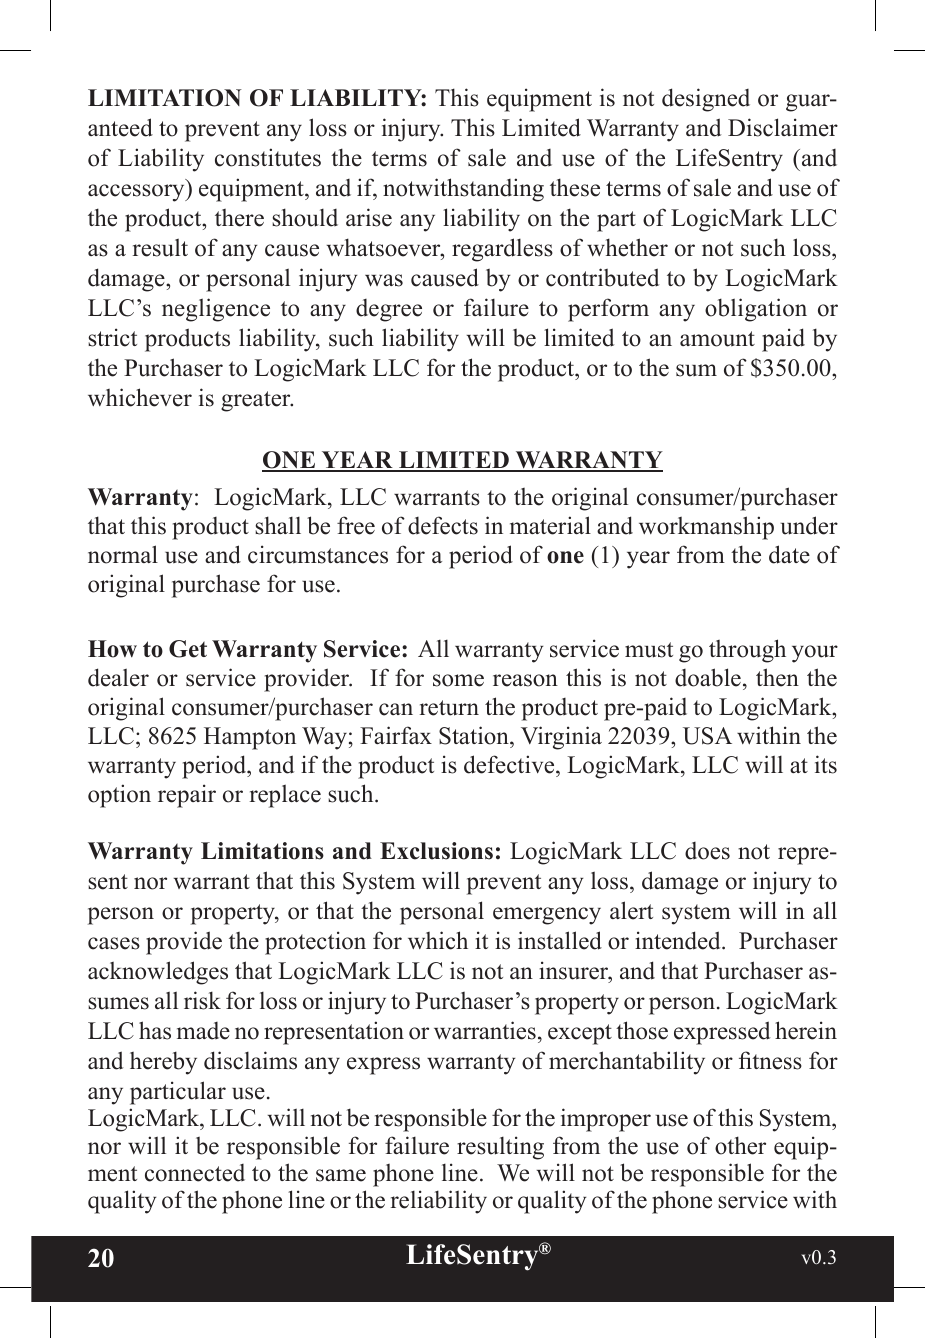 20 LifeSentry®                                                           v0.3   LIMITATION OF LIABILITY: This equipment is not designed or guar-anteed to prevent any loss or injury. This Limited Warranty and Disclaimer of  Liability  constitutes  the  terms  of  sale  and  use  of  the  LifeSentry  (and accessory) equipment, and if, notwithstanding these terms of sale and use of the product, there should arise any liability on the part of LogicMark LLC as a result of any cause whatsoever, regardless of whether or not such loss, damage, or personal injury was caused by or contributed to by LogicMark LLC’s  negligence  to  any  degree  or  failure  to  perform  any  obligation  or strict products liability, such liability will be limited to an amount paid by the Purchaser to LogicMark LLC for the product, or to the sum of $350.00, whichever is greater.ONE YEAR LIMITED WARRANTYWarranty:  LogicMark, LLC warrants to the original consumer/purchaser that this product shall be free of defects in material and workmanship under normal use and circumstances for a period of one (1) year from the date of original purchase for use. How to Get Warranty Service:  All warranty service must go through your dealer or service provider.  If for some reason this is not doable, then the original consumer/purchaser can return the product pre-paid to LogicMark, LLC; 8625 Hampton Way; Fairfax Station, Virginia 22039, USA within the warranty period, and if the product is defective, LogicMark, LLC will at its option repair or replace such.Warranty Limitations and Exclusions: LogicMark LLC does not repre-sent nor warrant that this System will prevent any loss, damage or injury to person or property, or that the personal emergency alert system will in all cases provide the protection for which it is installed or intended.  Purchaser acknowledges that LogicMark LLC is not an insurer, and that Purchaser as-sumes all risk for loss or injury to Purchaser’s property or person. LogicMark LLC has made no representation or warranties, except those expressed herein and hereby disclaims any express warranty of merchantability or tness for any particular use. LogicMark, LLC. will not be responsible for the improper use of this System, nor will it be responsible for failure resulting from the use of other equip-ment connected to the same phone line.  We will not be responsible for the quality of the phone line or the reliability or quality of the phone service with 